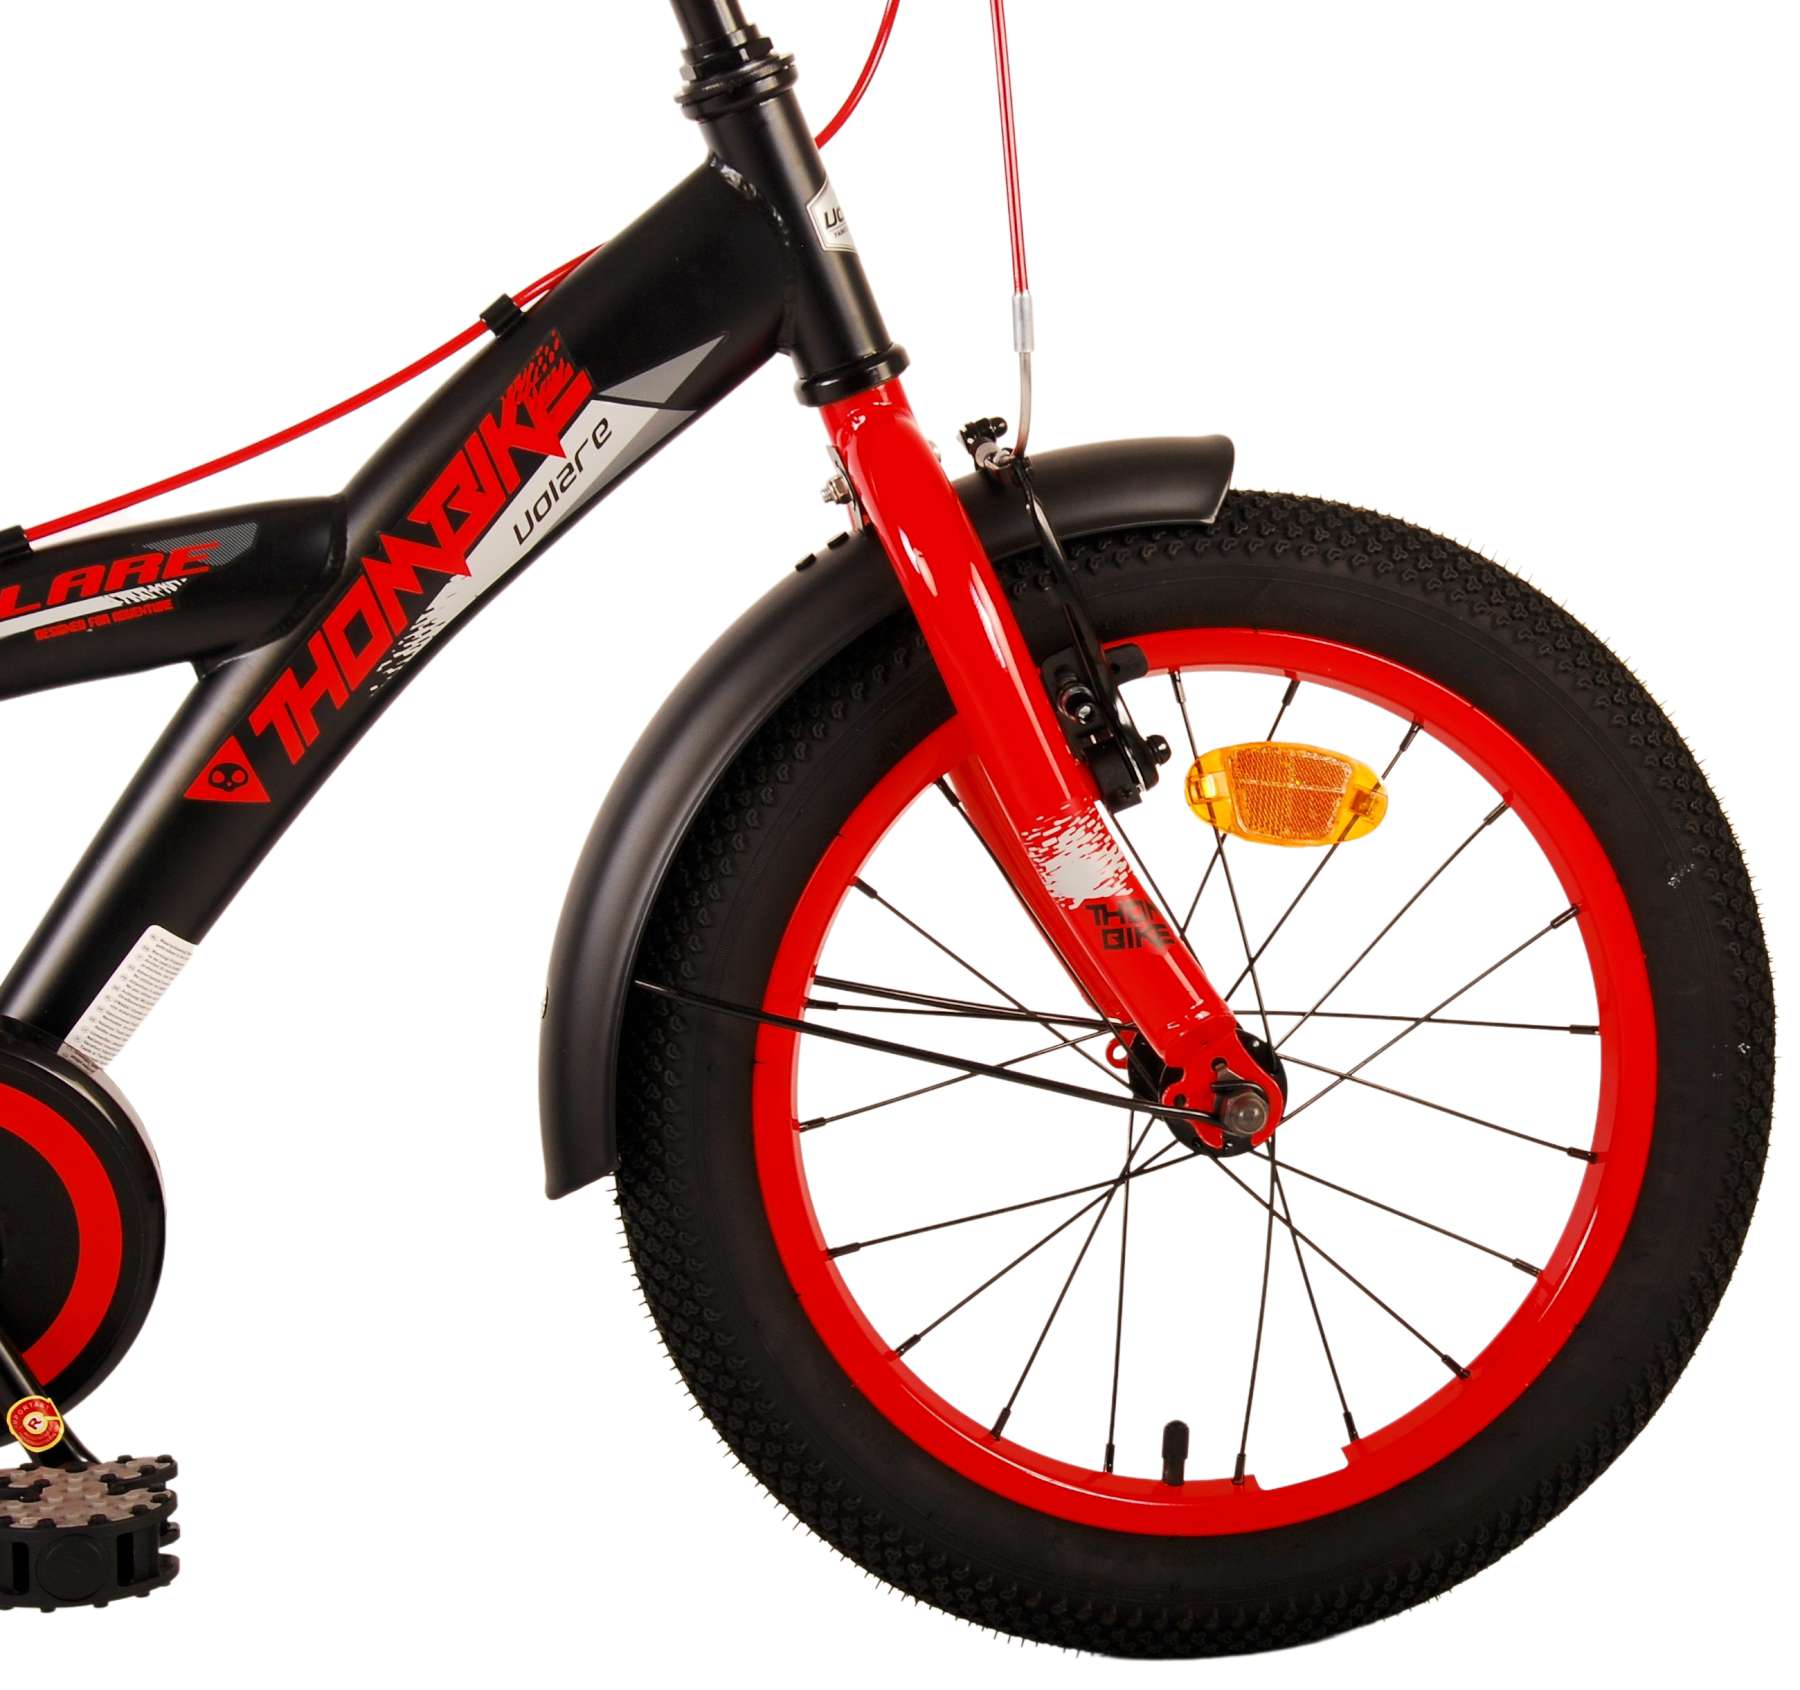 Thombike_16_inch_Rood_-_4-W1800